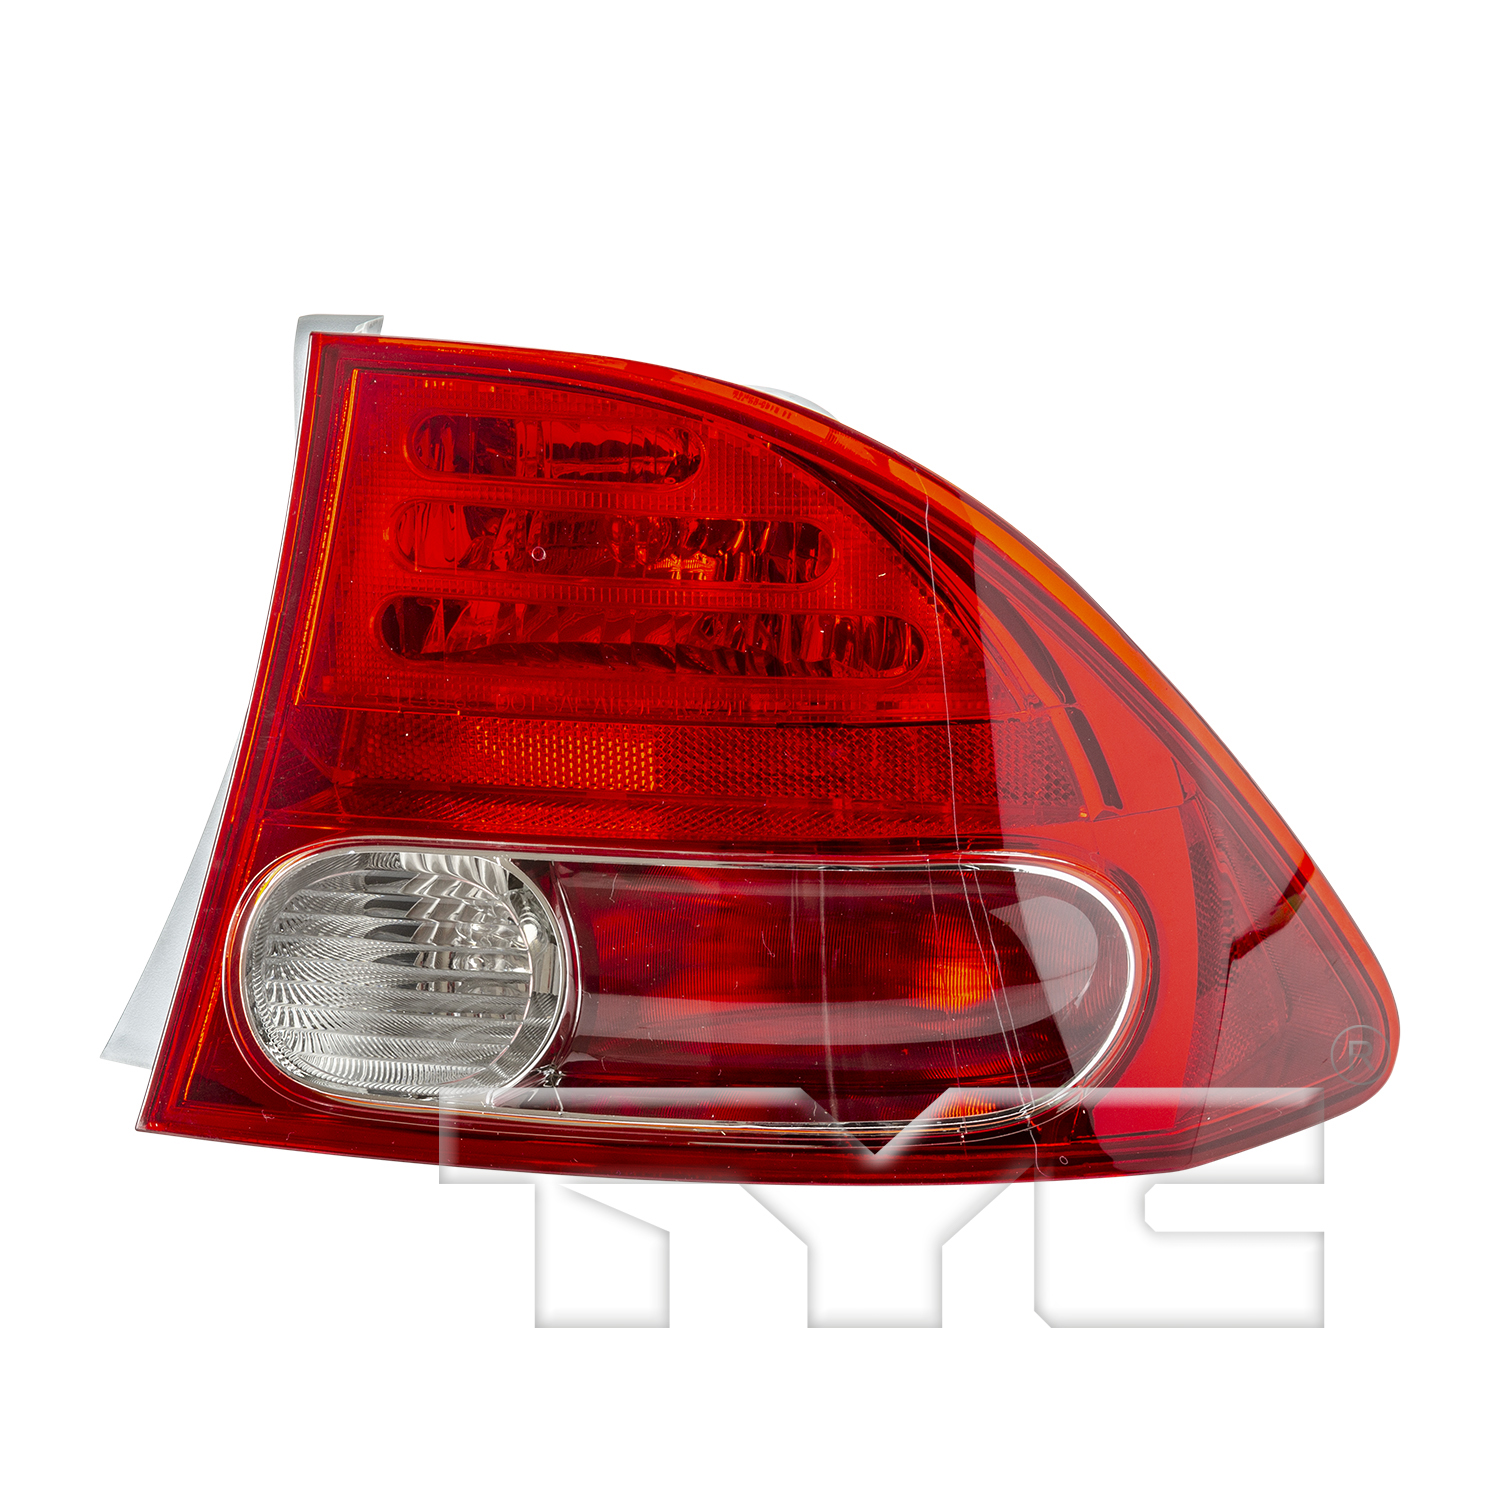 Aftermarket TAILLIGHTS for HONDA - CIVIC, CIVIC,06-08,RT Taillamp assy